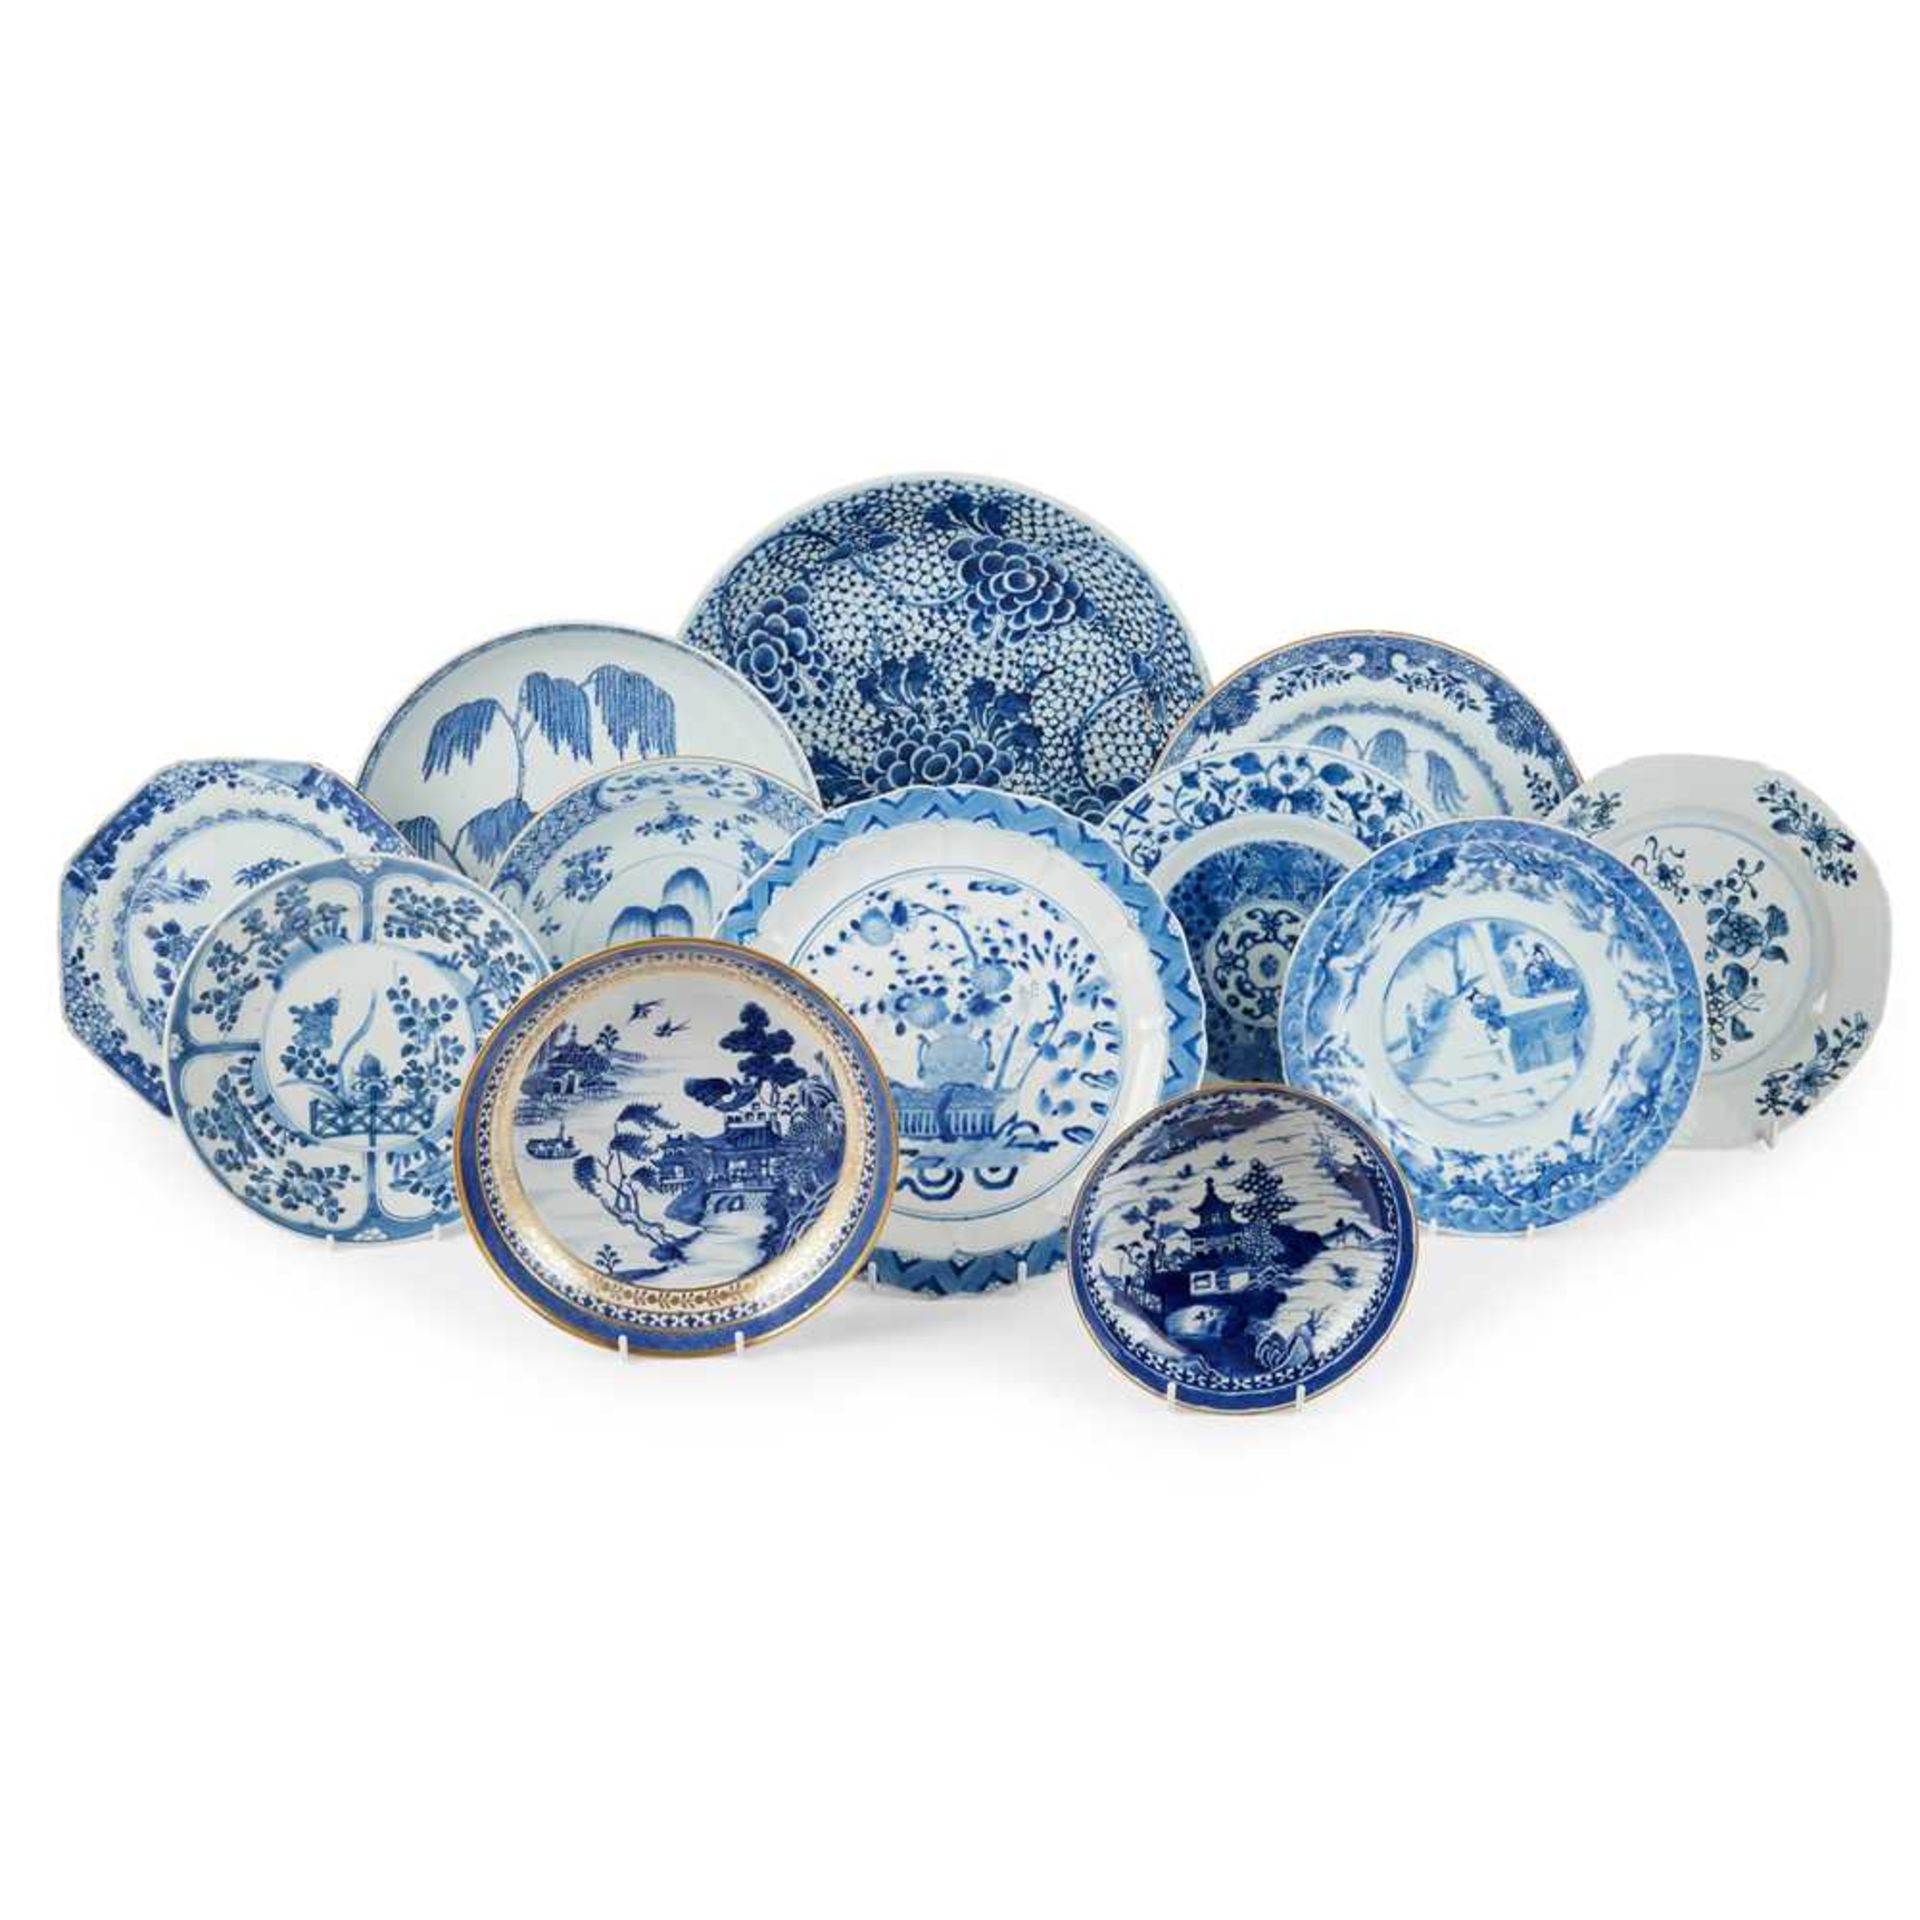 GROUP OF TWELVE BLUE AND WHITE PLATES AND CHARGERS QING DYNASTY, 18TH CENTURY